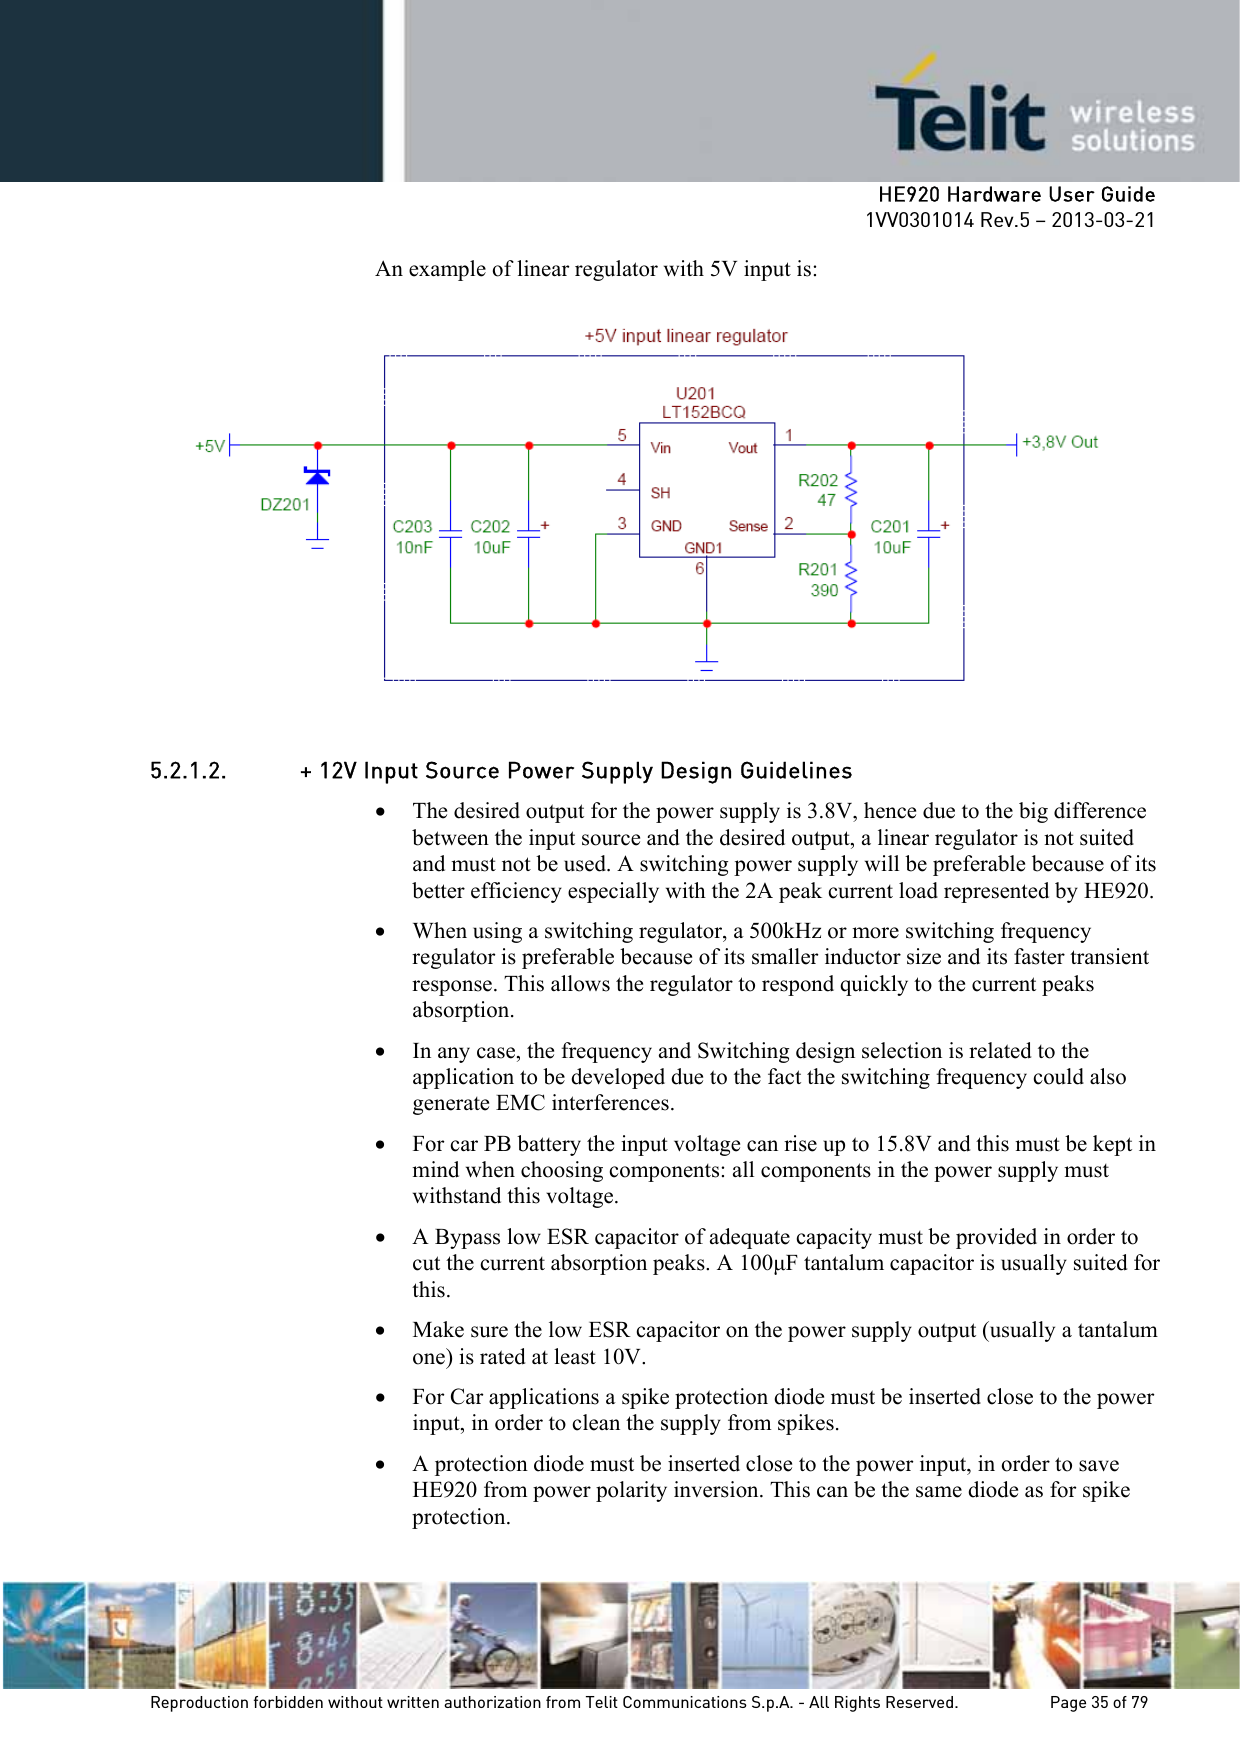     HE920 Hardware User Guide 1VV0301014 Rev.5 – 2013-03-21 Reproduction forbidden without written authorization from Telit Communications S.p.A. - All Rights Reserved.    Page 35 of 79  An example of linear regulator with 5V input is:  5.2.1.2. + 12V Input Source Power Supply Design Guidelines • The desired output for the power supply is 3.8V, hence due to the big difference between the input source and the desired output, a linear regulator is not suited and must not be used. A switching power supply will be preferable because of its better efficiency especially with the 2A peak current load represented by HE920.  • When using a switching regulator, a 500kHz or more switching frequency regulator is preferable because of its smaller inductor size and its faster transient response. This allows the regulator to respond quickly to the current peaks absorption.  • In any case, the frequency and Switching design selection is related to the application to be developed due to the fact the switching frequency could also generate EMC interferences. • For car PB battery the input voltage can rise up to 15.8V and this must be kept in mind when choosing components: all components in the power supply must withstand this voltage. • A Bypass low ESR capacitor of adequate capacity must be provided in order to cut the current absorption peaks. A 100µF tantalum capacitor is usually suited for this. • Make sure the low ESR capacitor on the power supply output (usually a tantalum one) is rated at least 10V. • For Car applications a spike protection diode must be inserted close to the power input, in order to clean the supply from spikes.  • A protection diode must be inserted close to the power input, in order to save HE920 from power polarity inversion. This can be the same diode as for spike protection. 